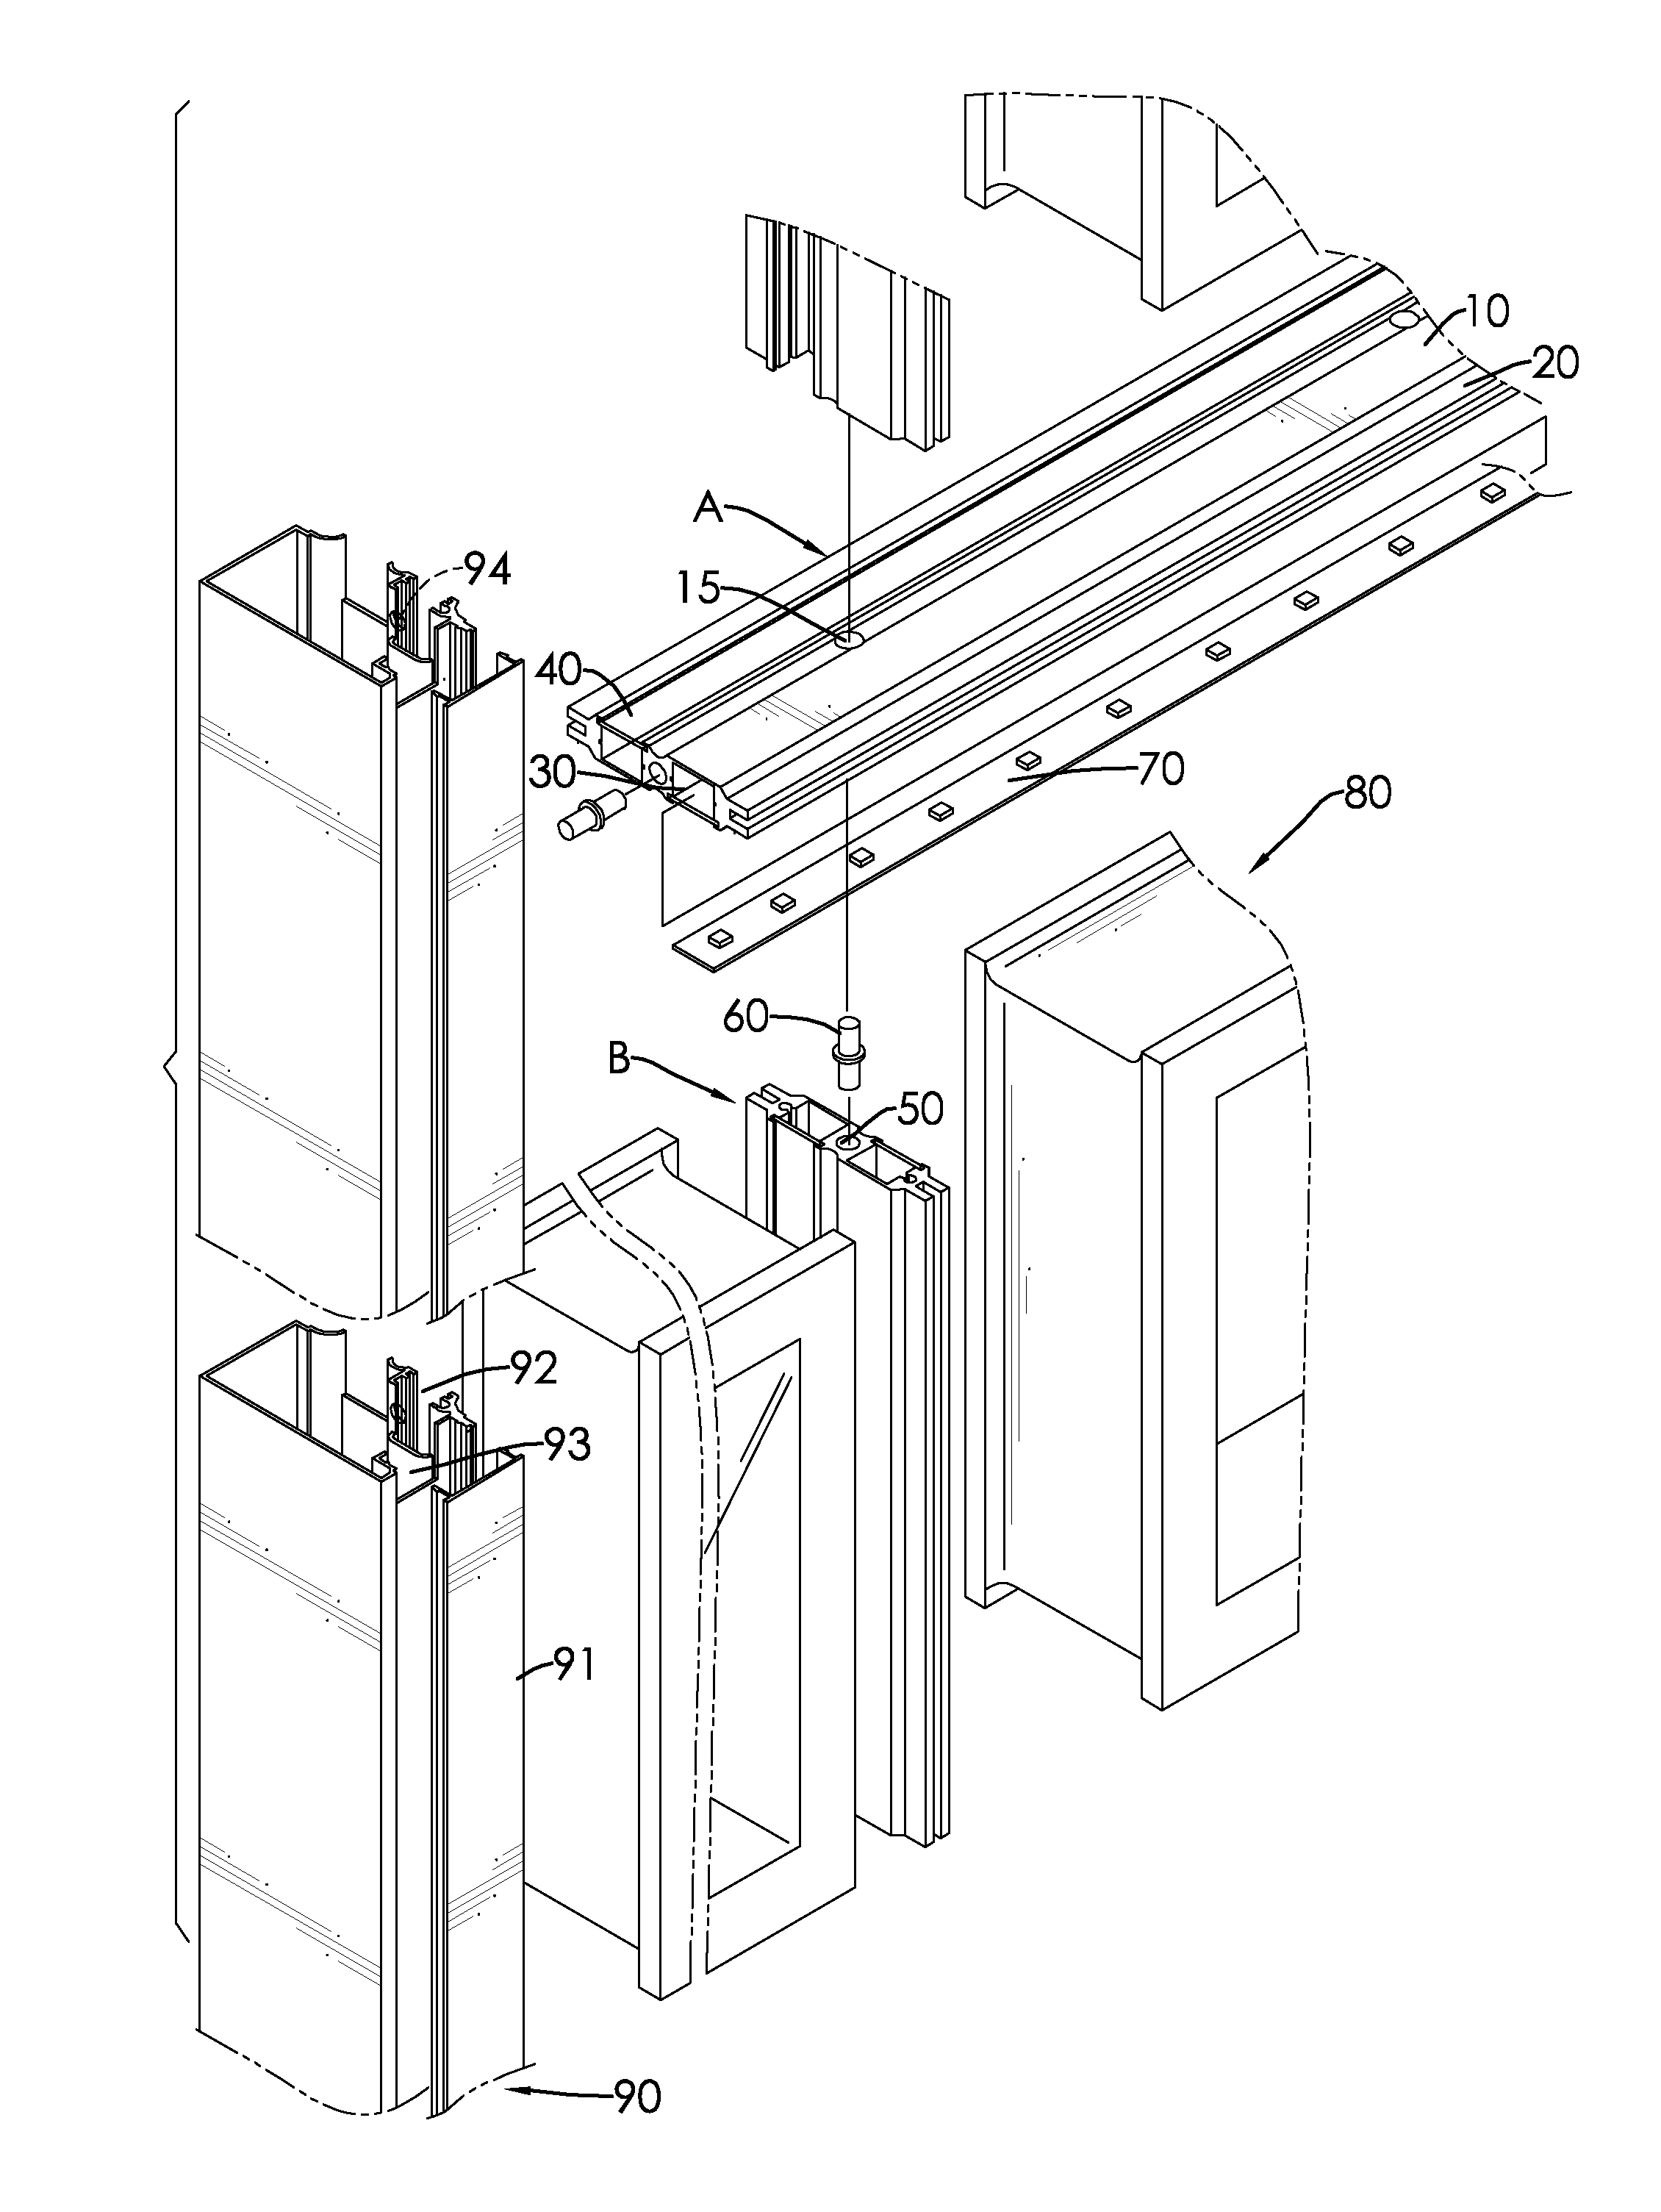 Support Frame of Glass Brick Wall and Method for Mounting the Same